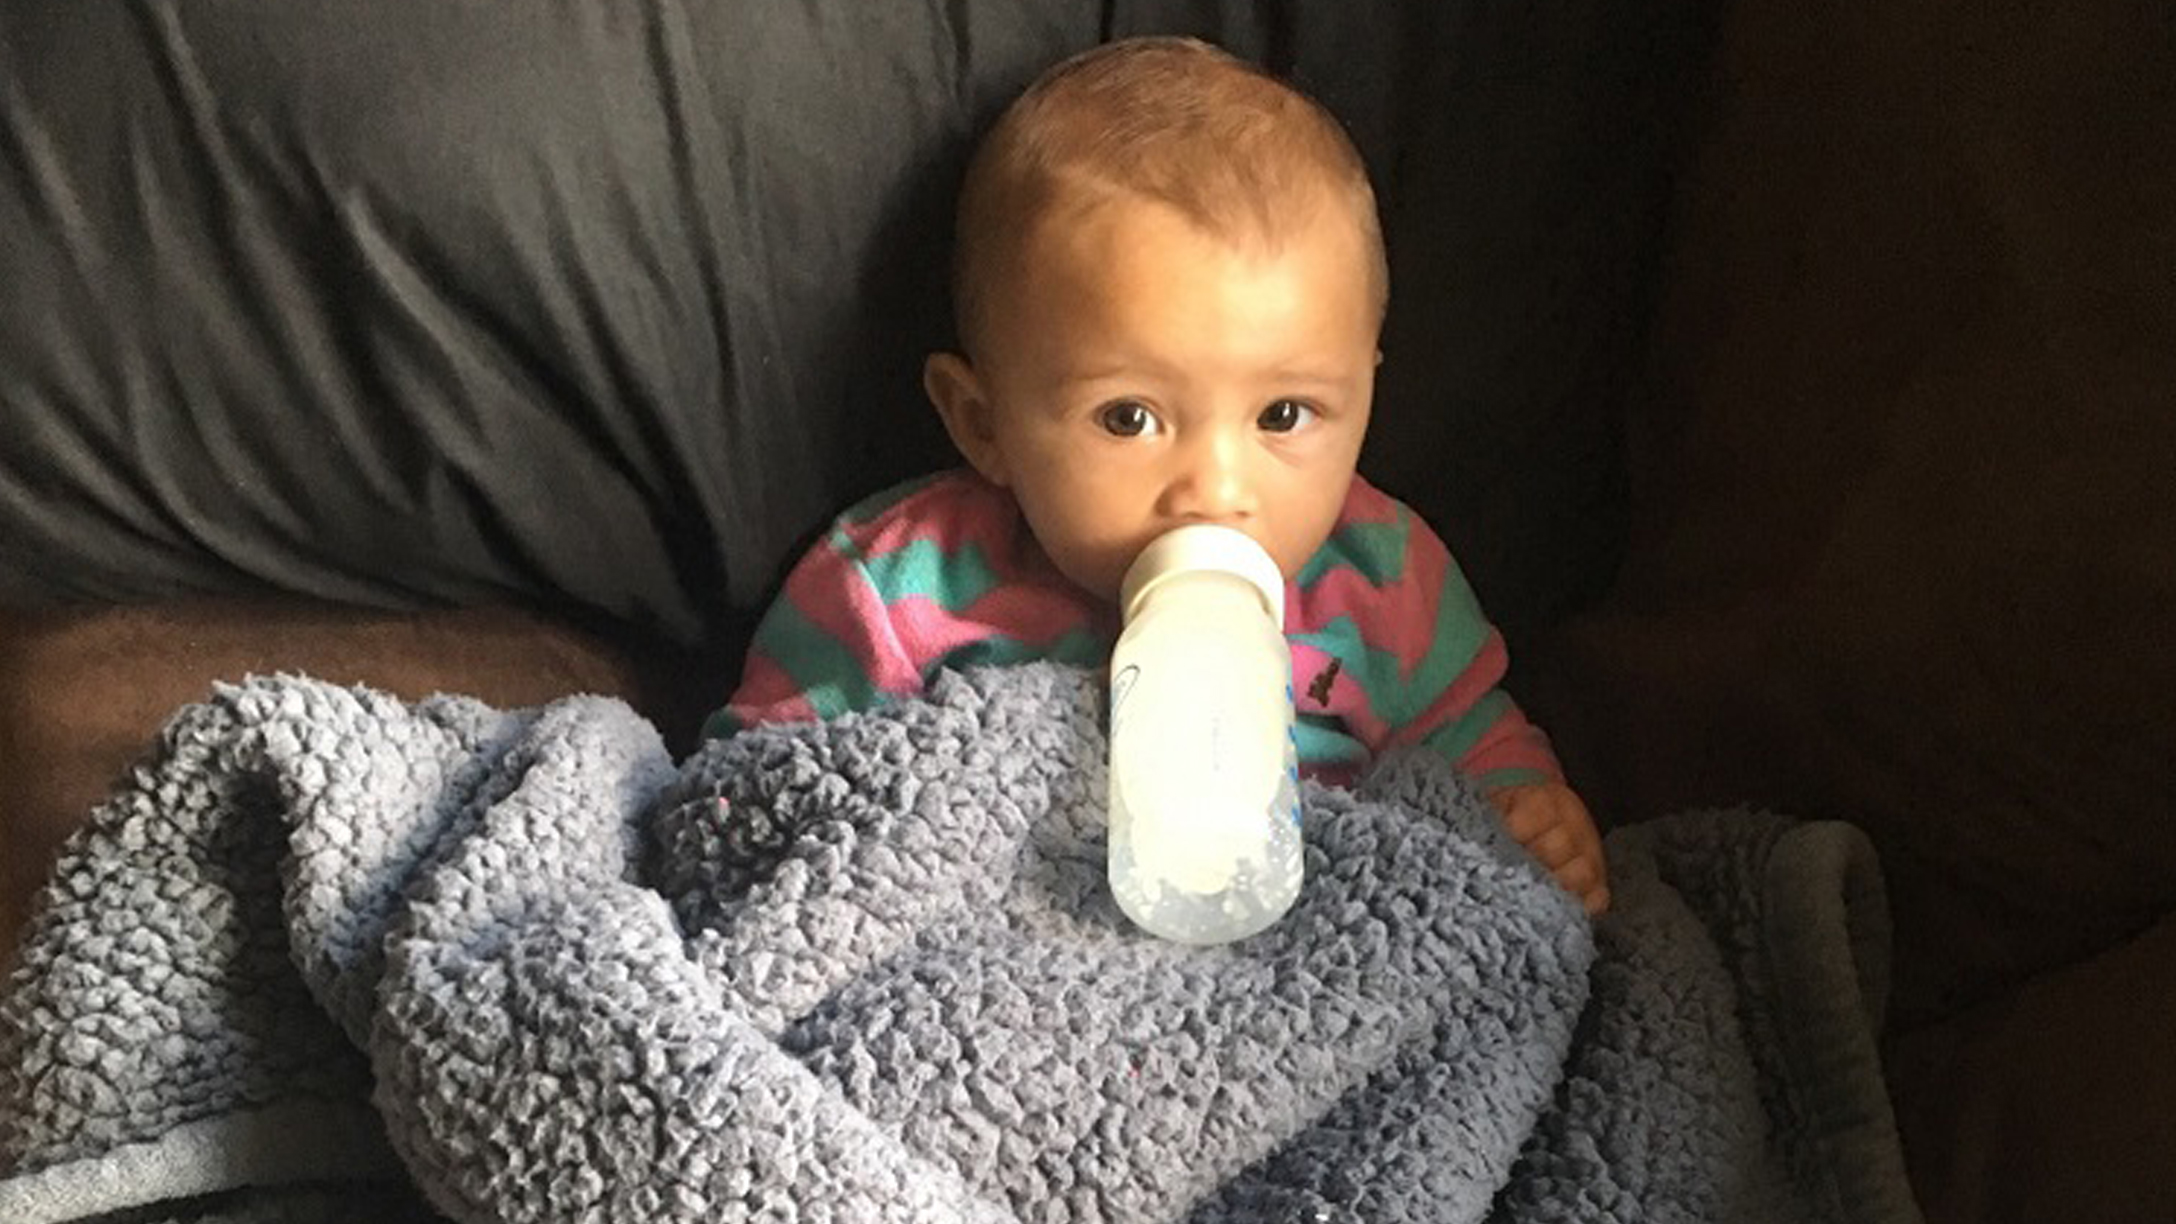 Mom Warns of Bottle Propping After Baby 